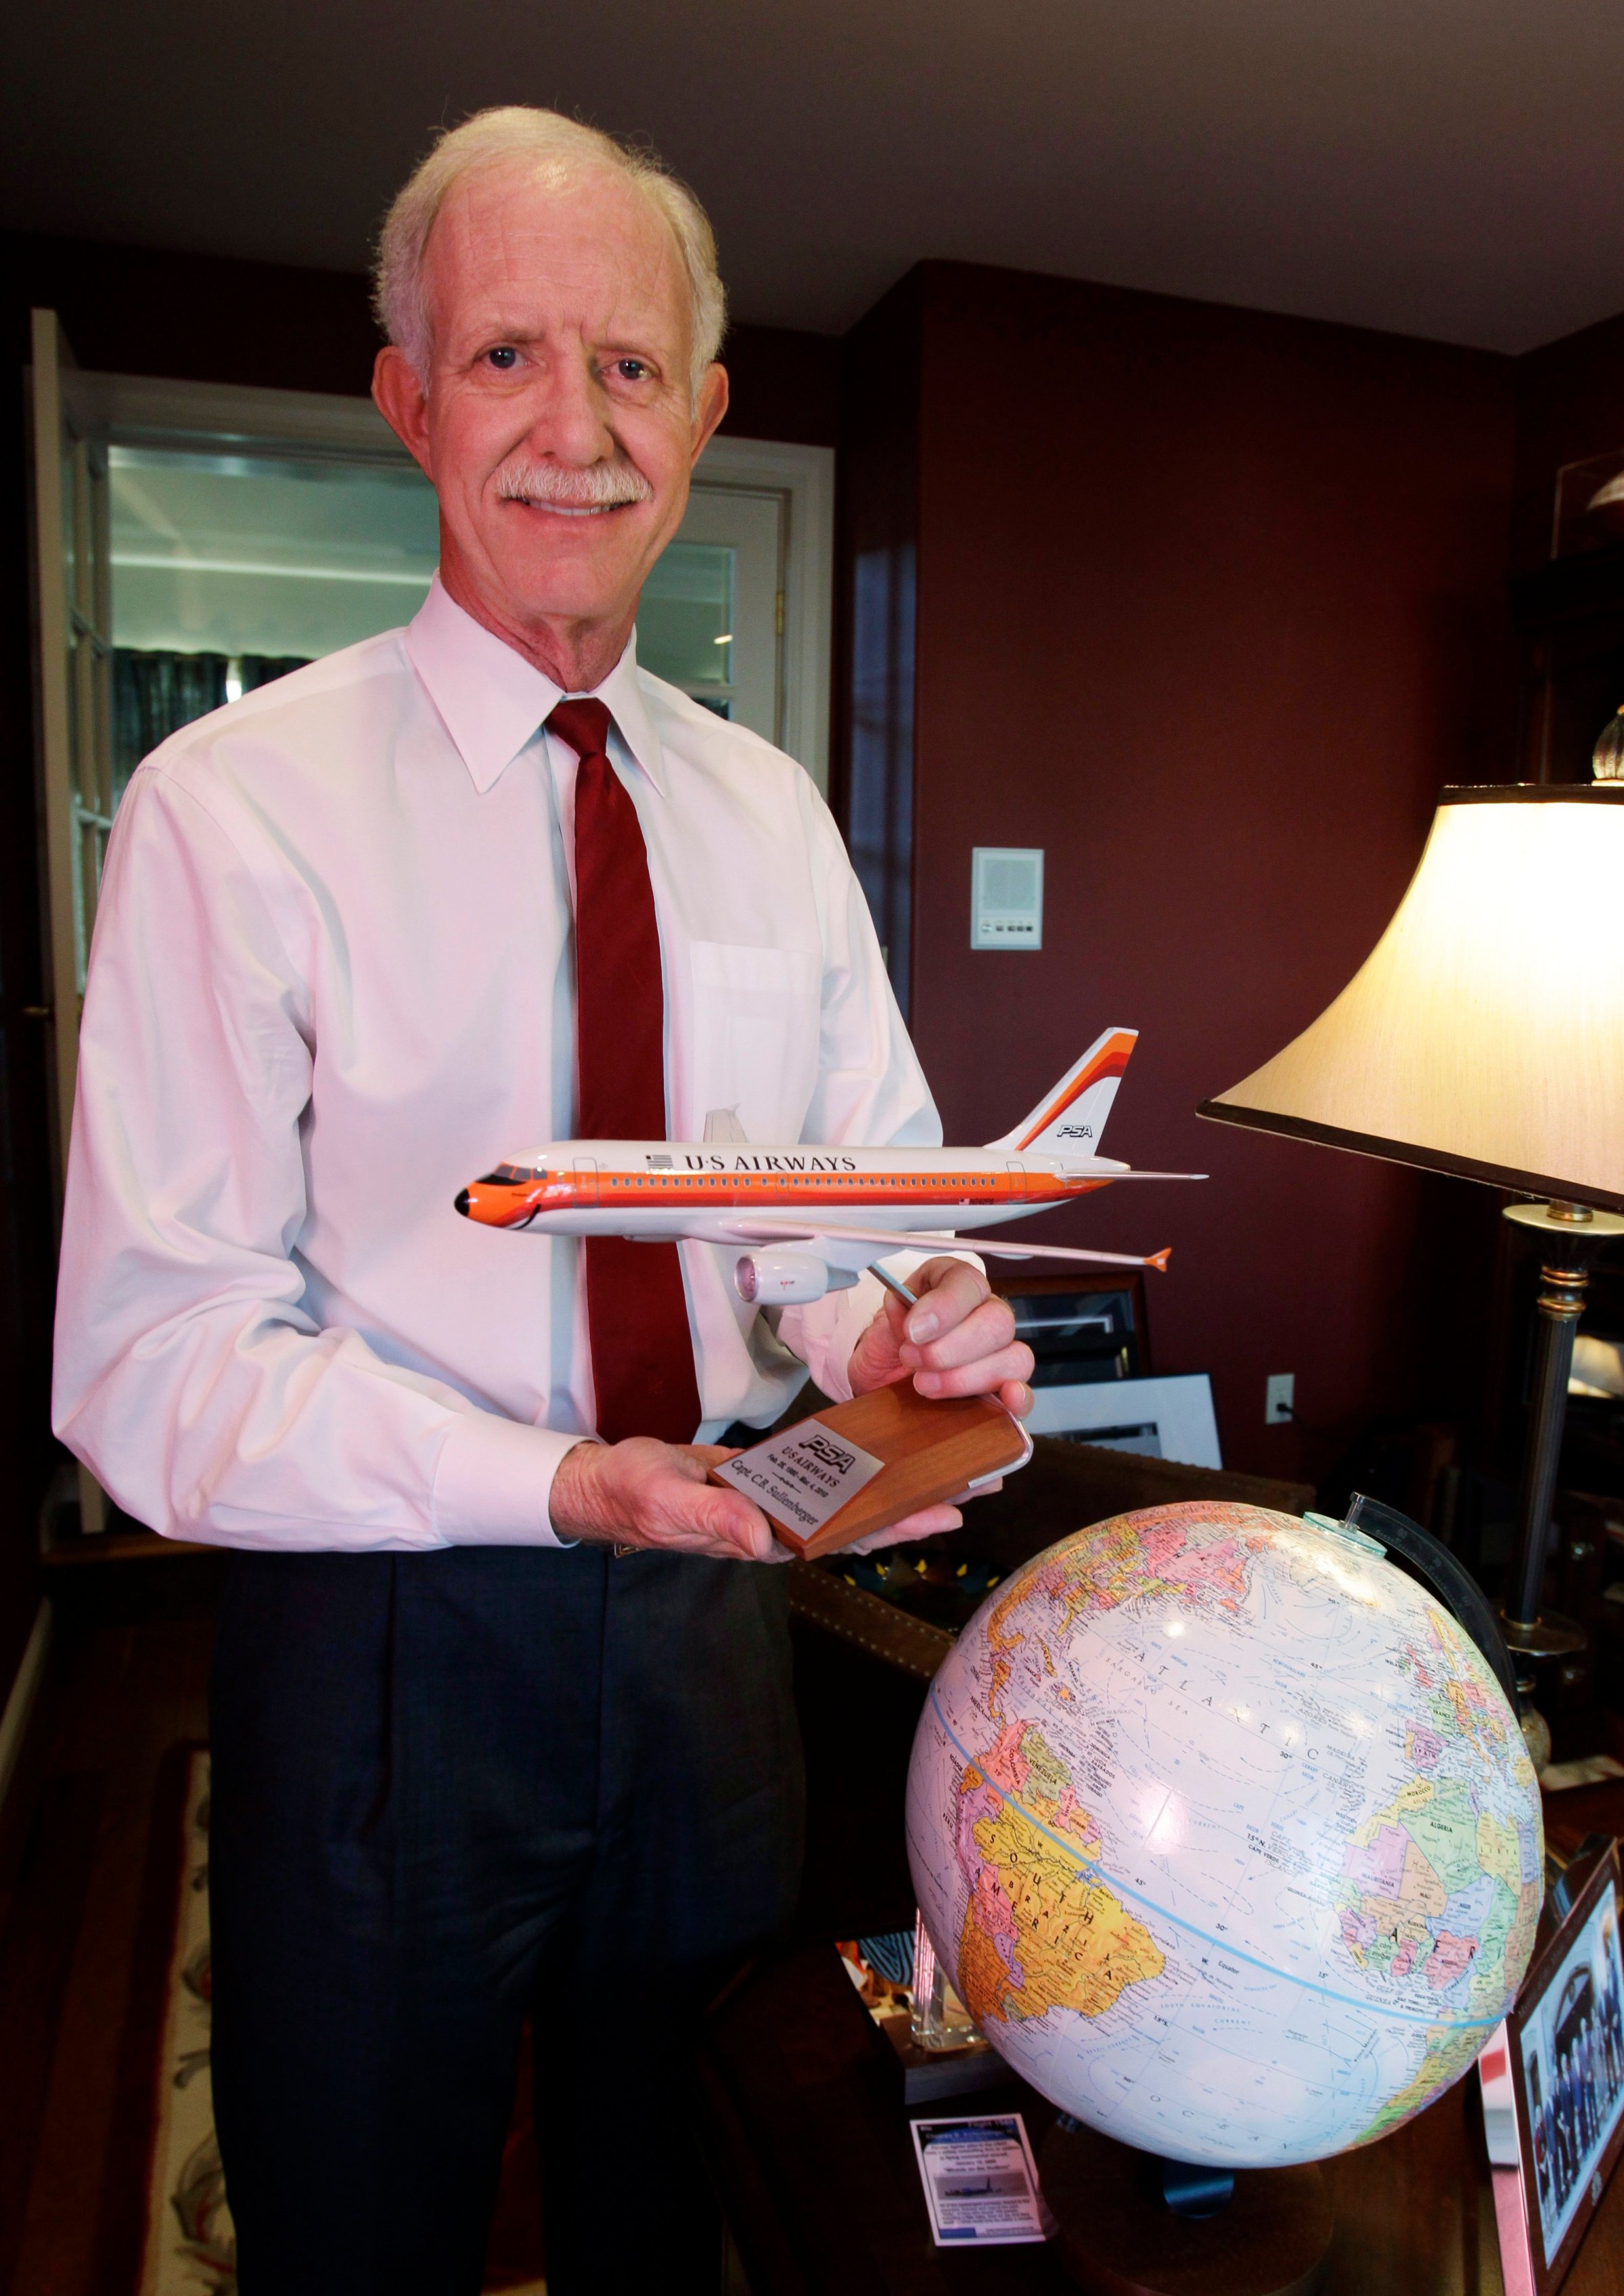 Chesley "Sully" Sullenberger captain of the US Airways flight #5149 that landed in New York's Hudson River in 2009, poses in his office at his home in Danville, Calif on Jan. 10. 2011.